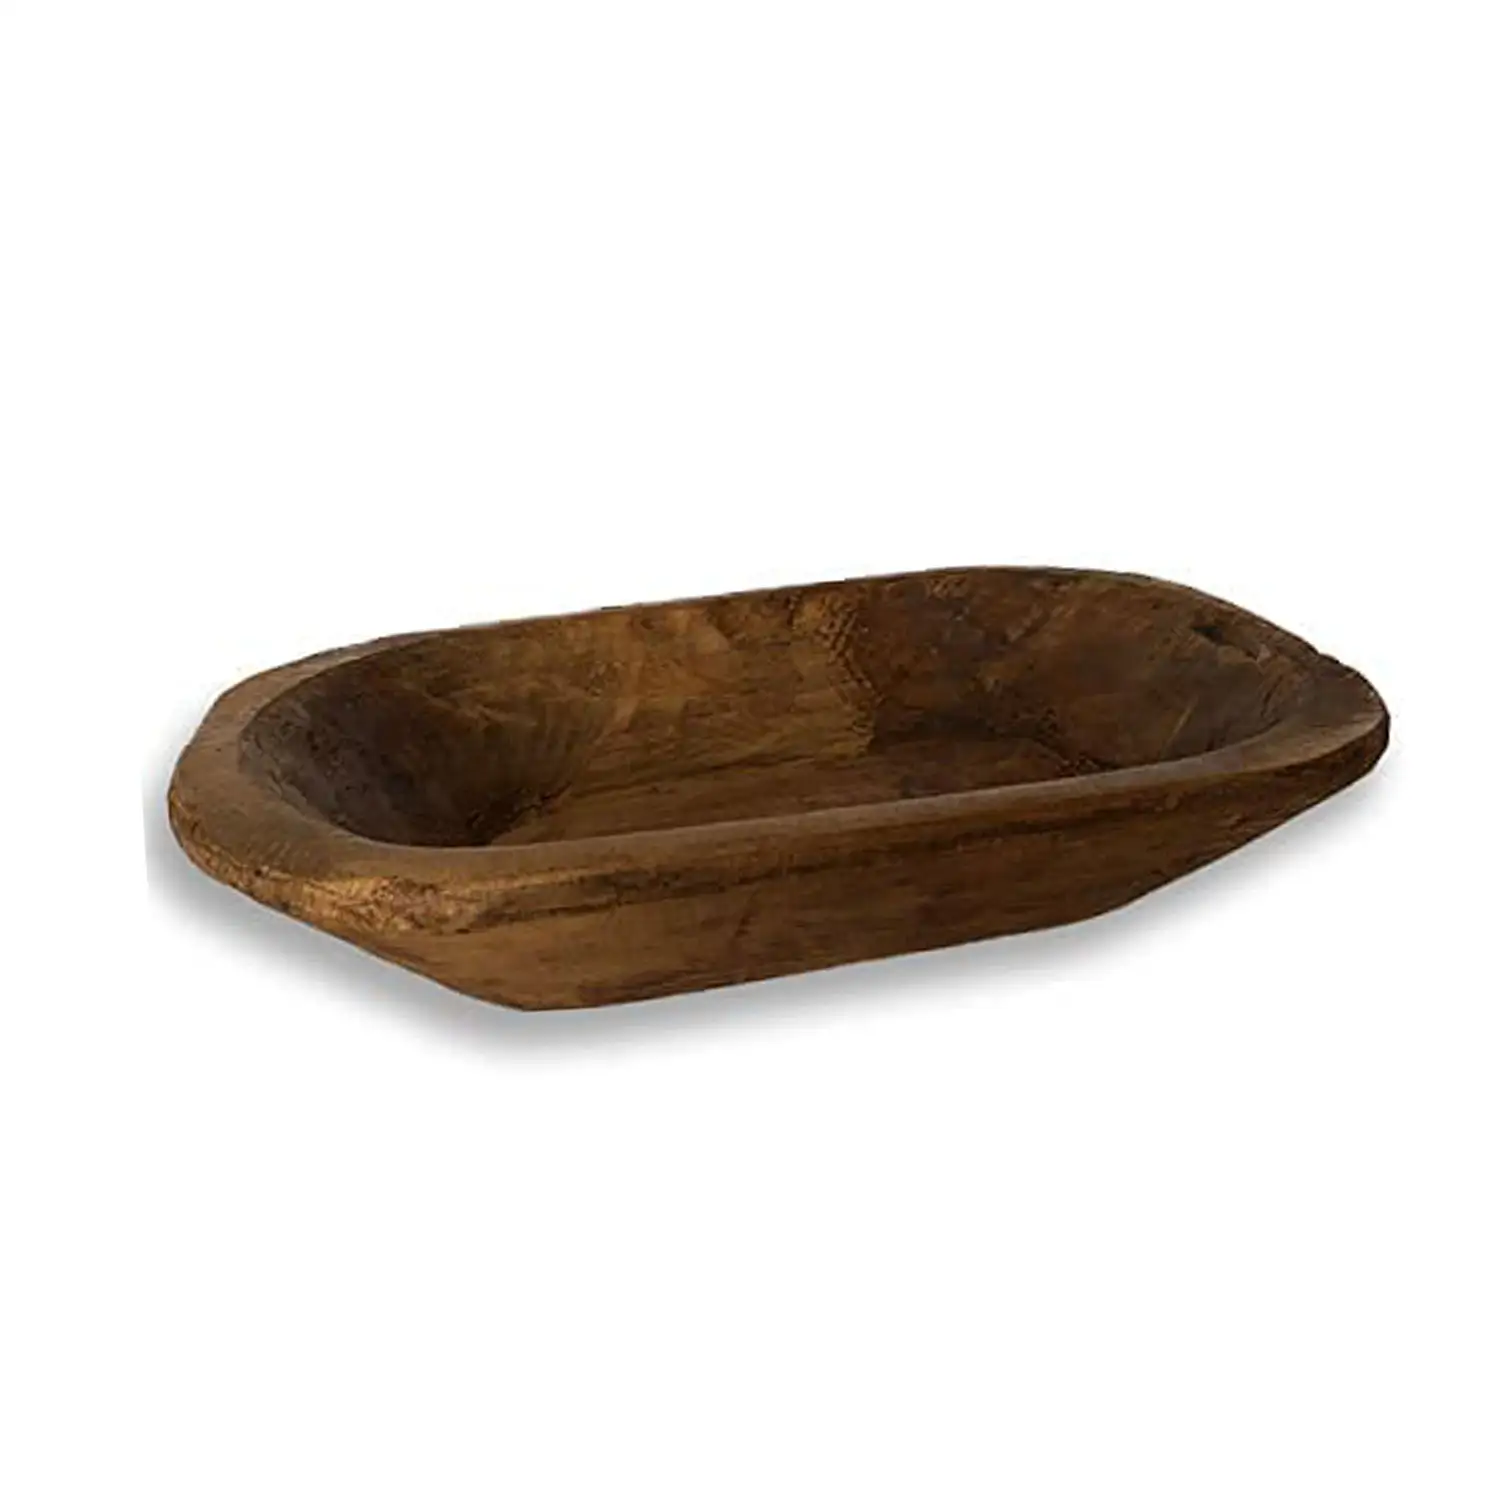 Rustic Hand Carved Wooden Bowl | Decorative Trays for Home Decor For Fruit, Bread, Moss and Rattan Wicker Balls and More - Farmh